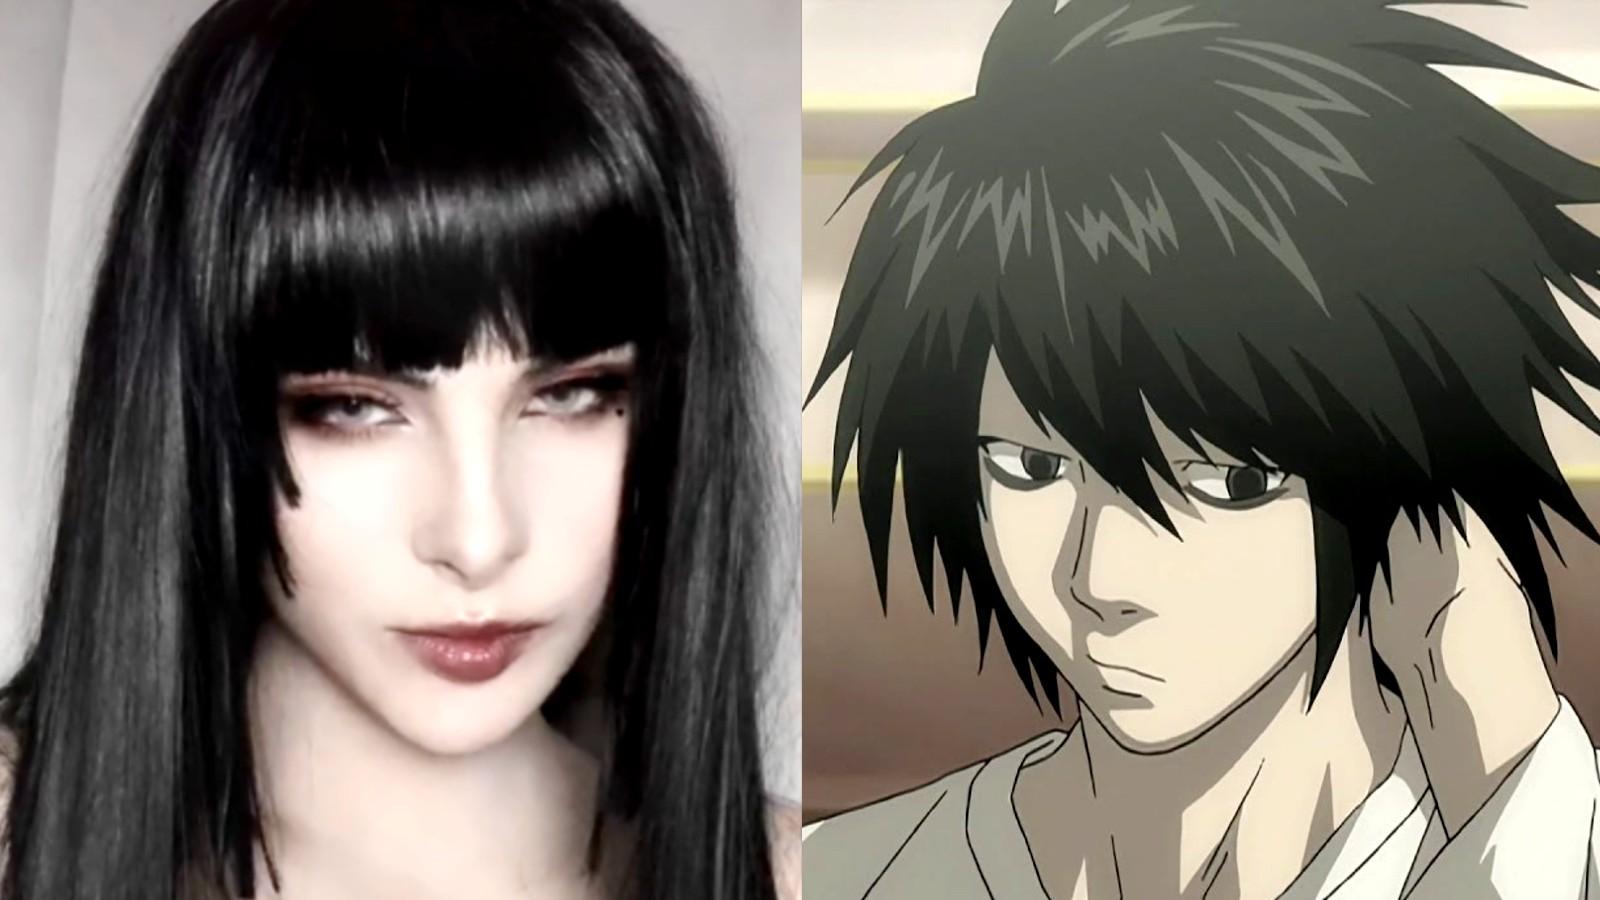 If you like Death Note, Follow my Goth Live Action Anime where two